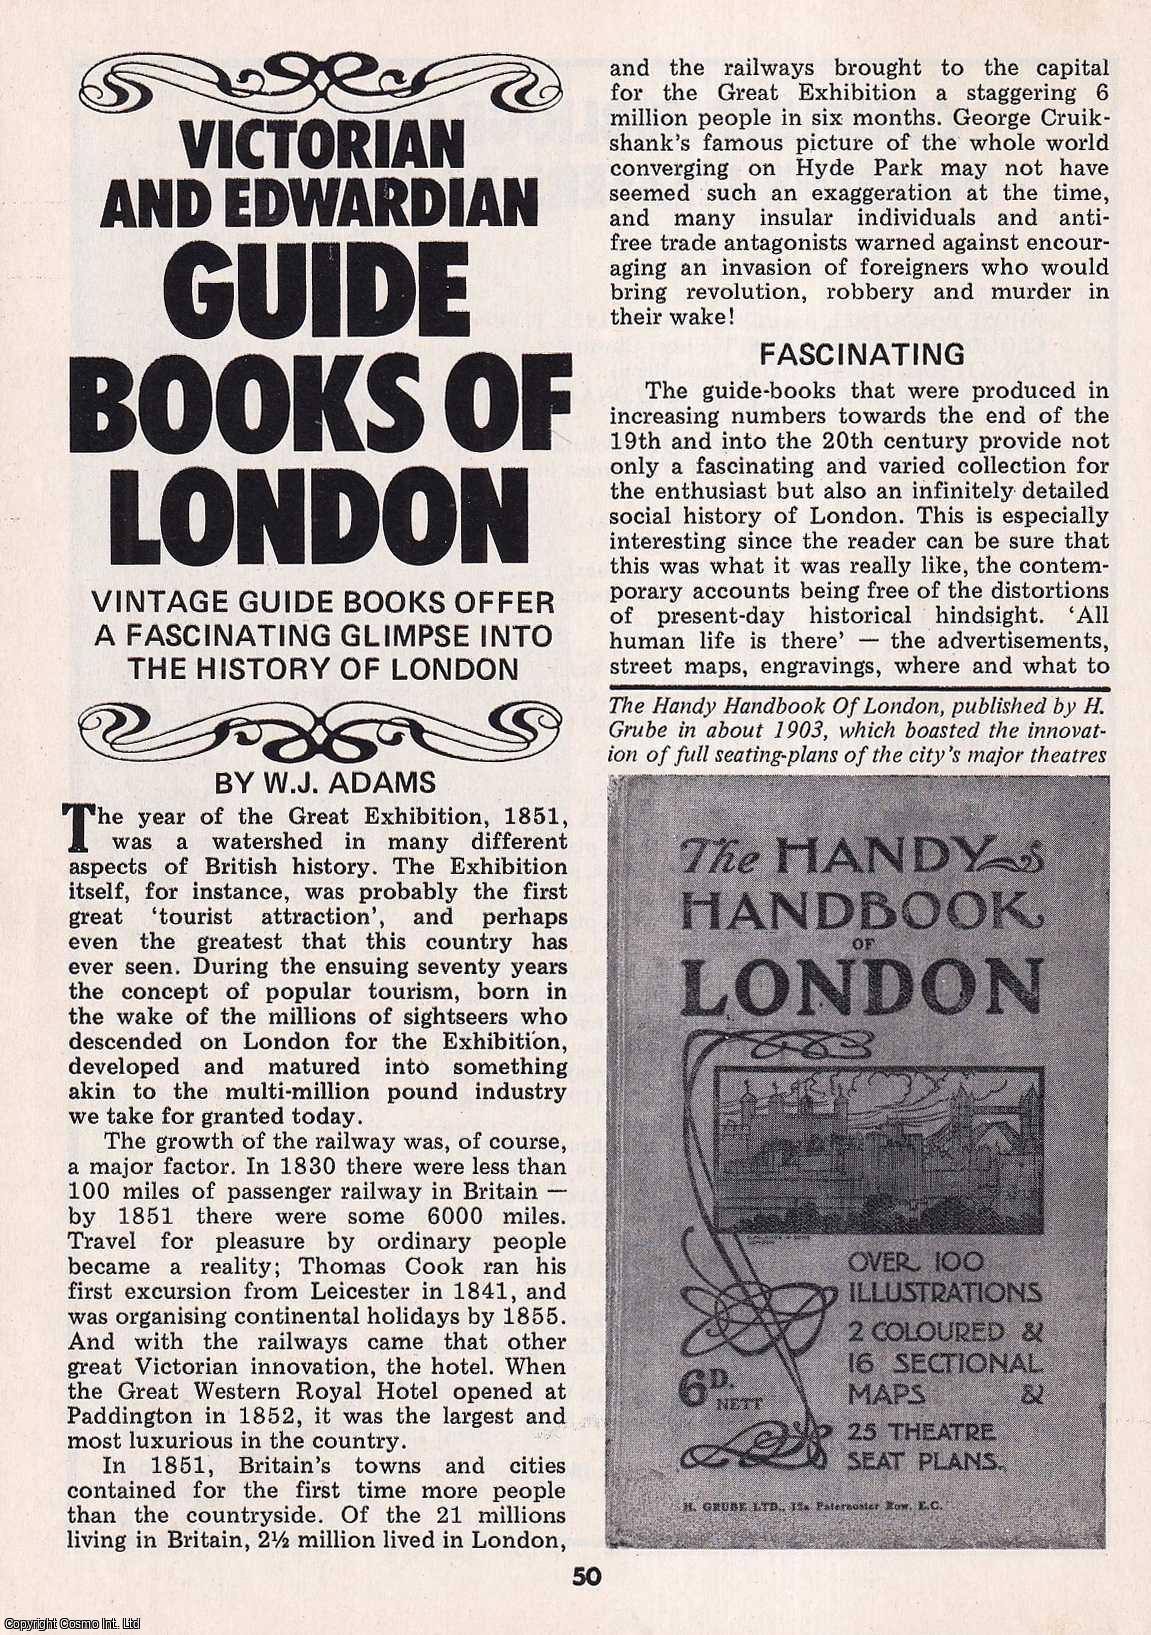 W.J. Adams - Victorian & Edwardian Guide Books of London. This is an original article separated from an issue of The Book & Magazine Collector publication.